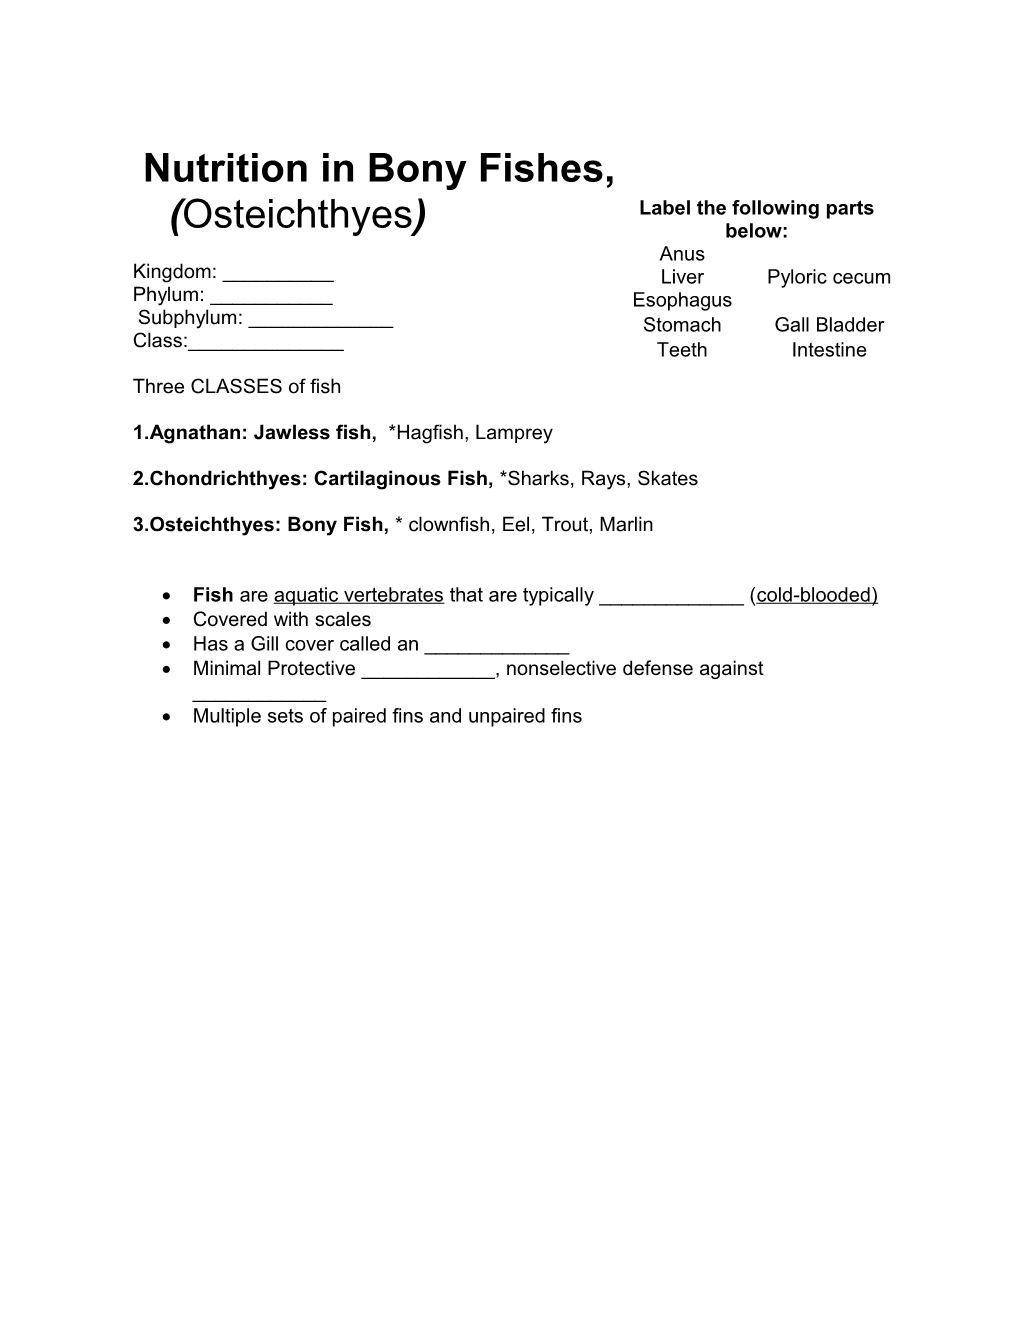 Nutrition in Bony Fishes, (Osteichthyes)